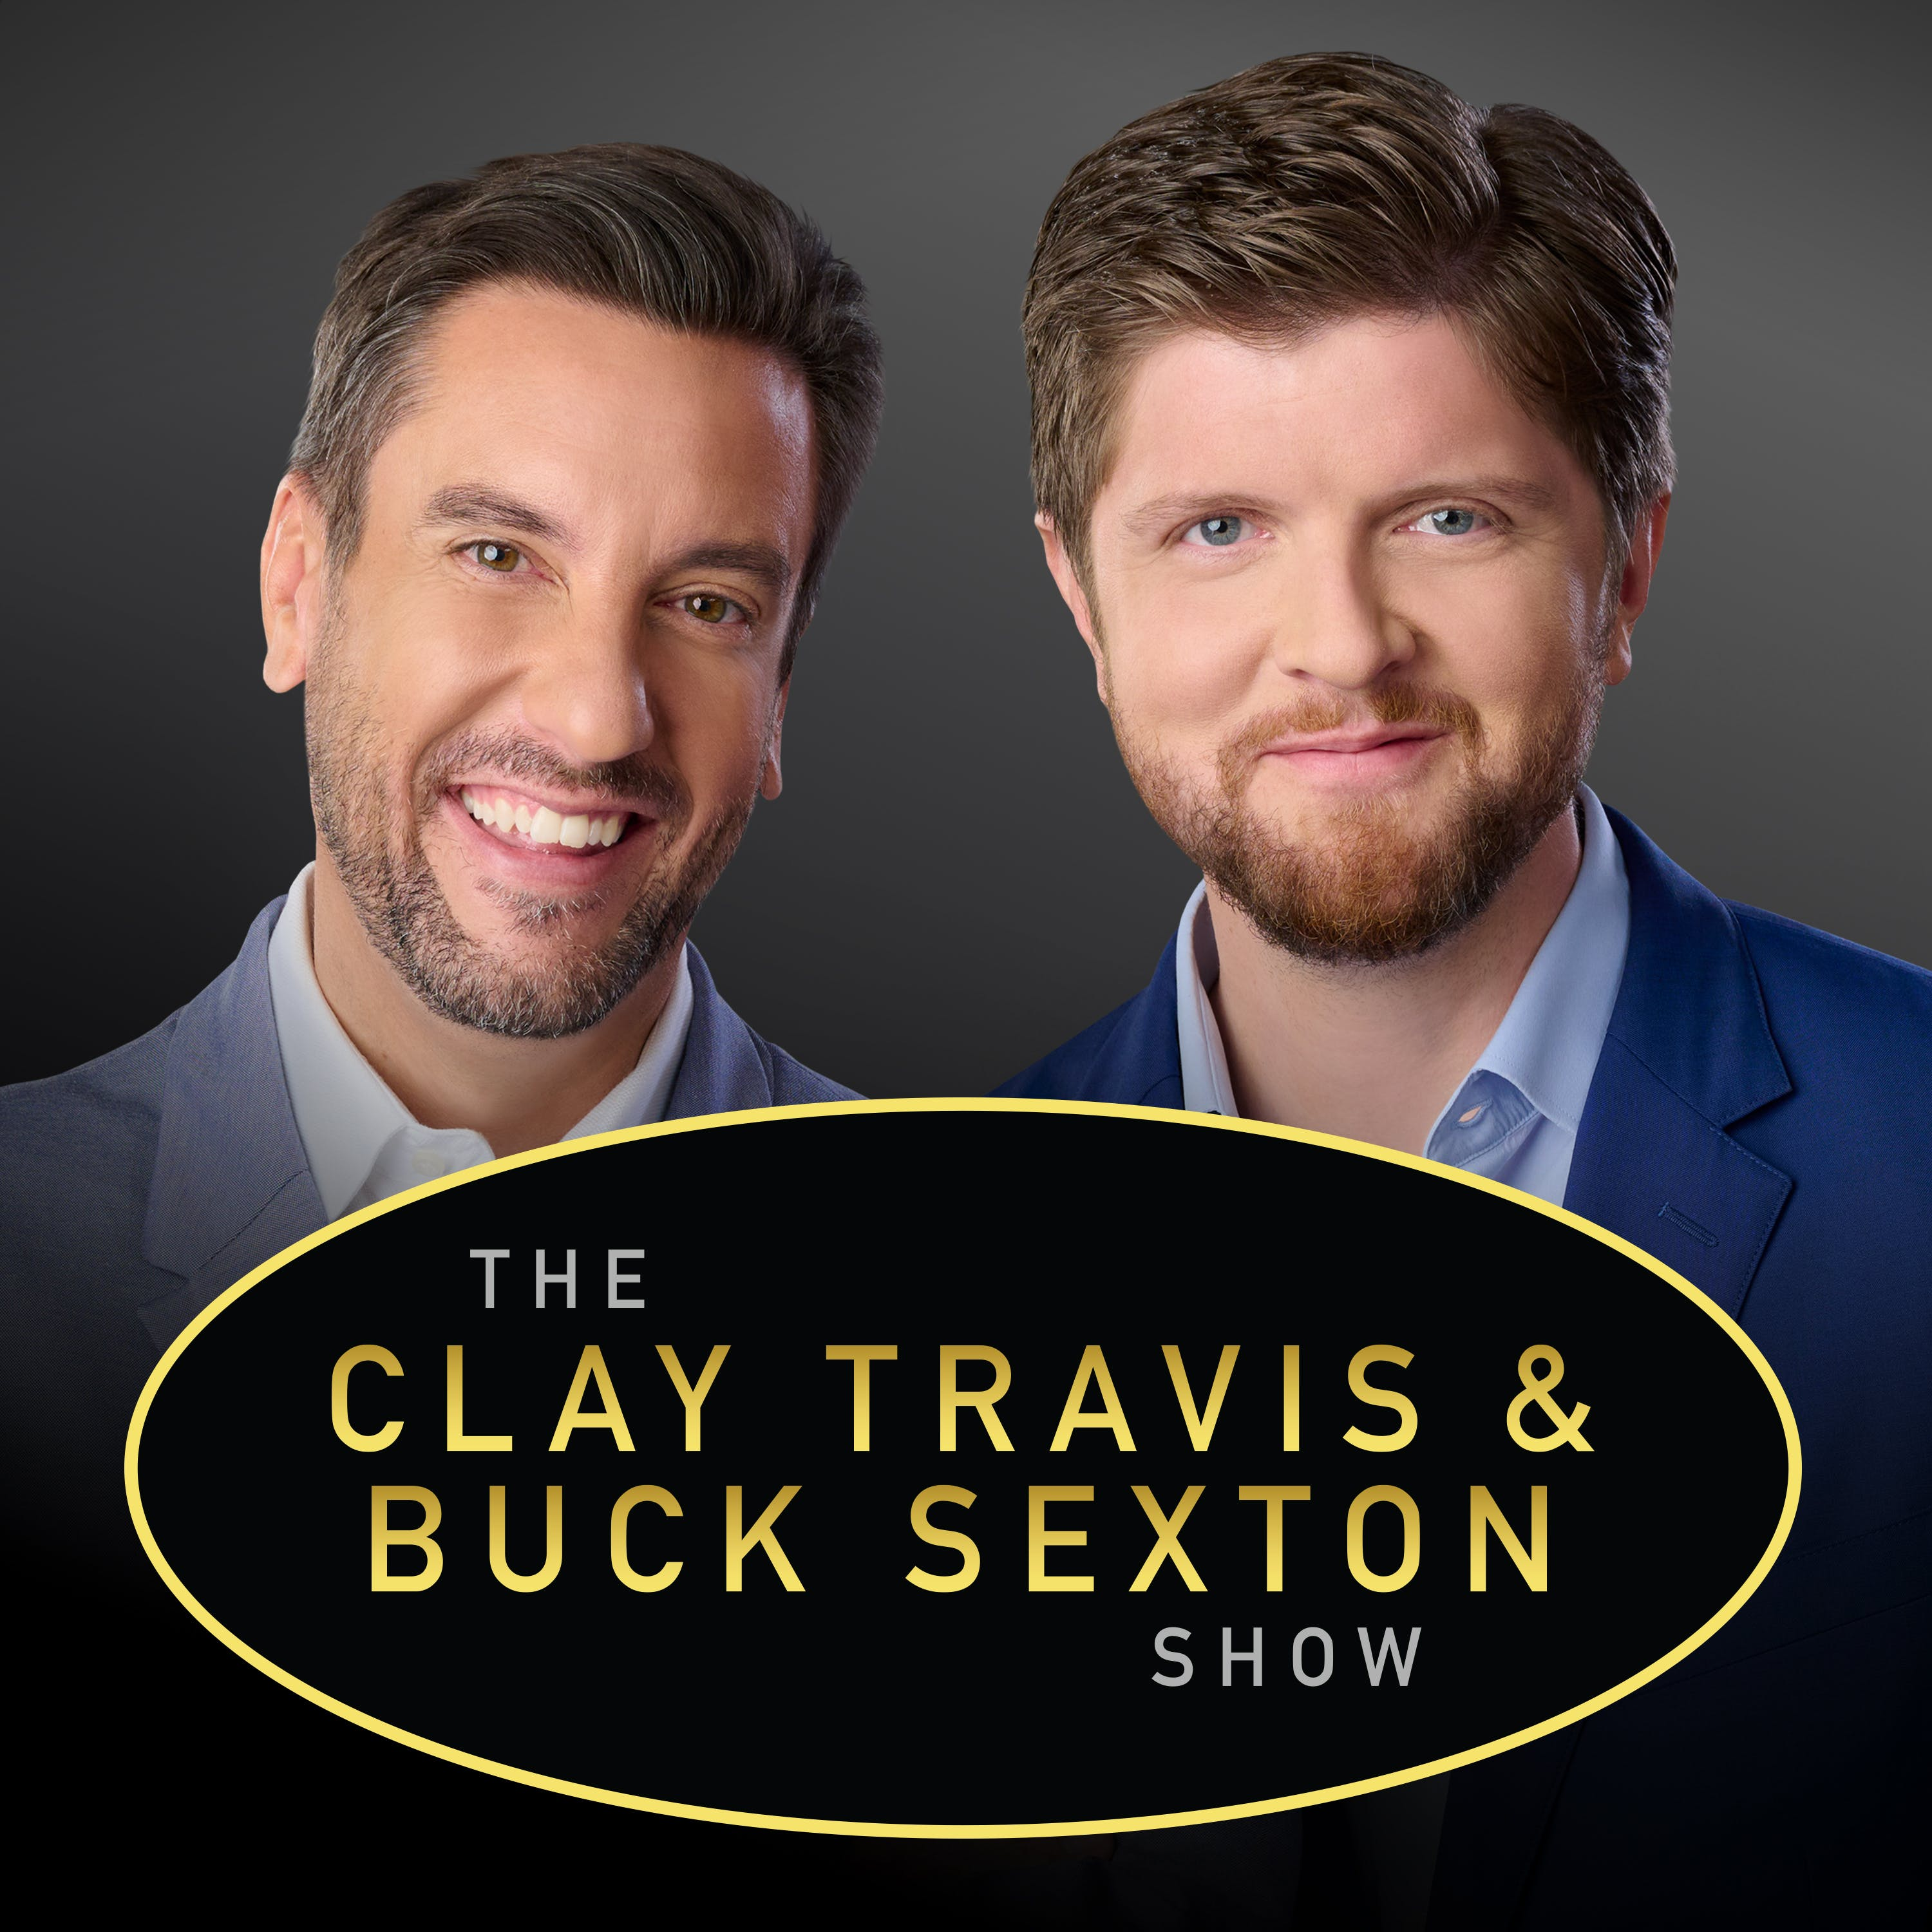 Clay Travis and Buck Sexton Show H1 – Dec 6 2021